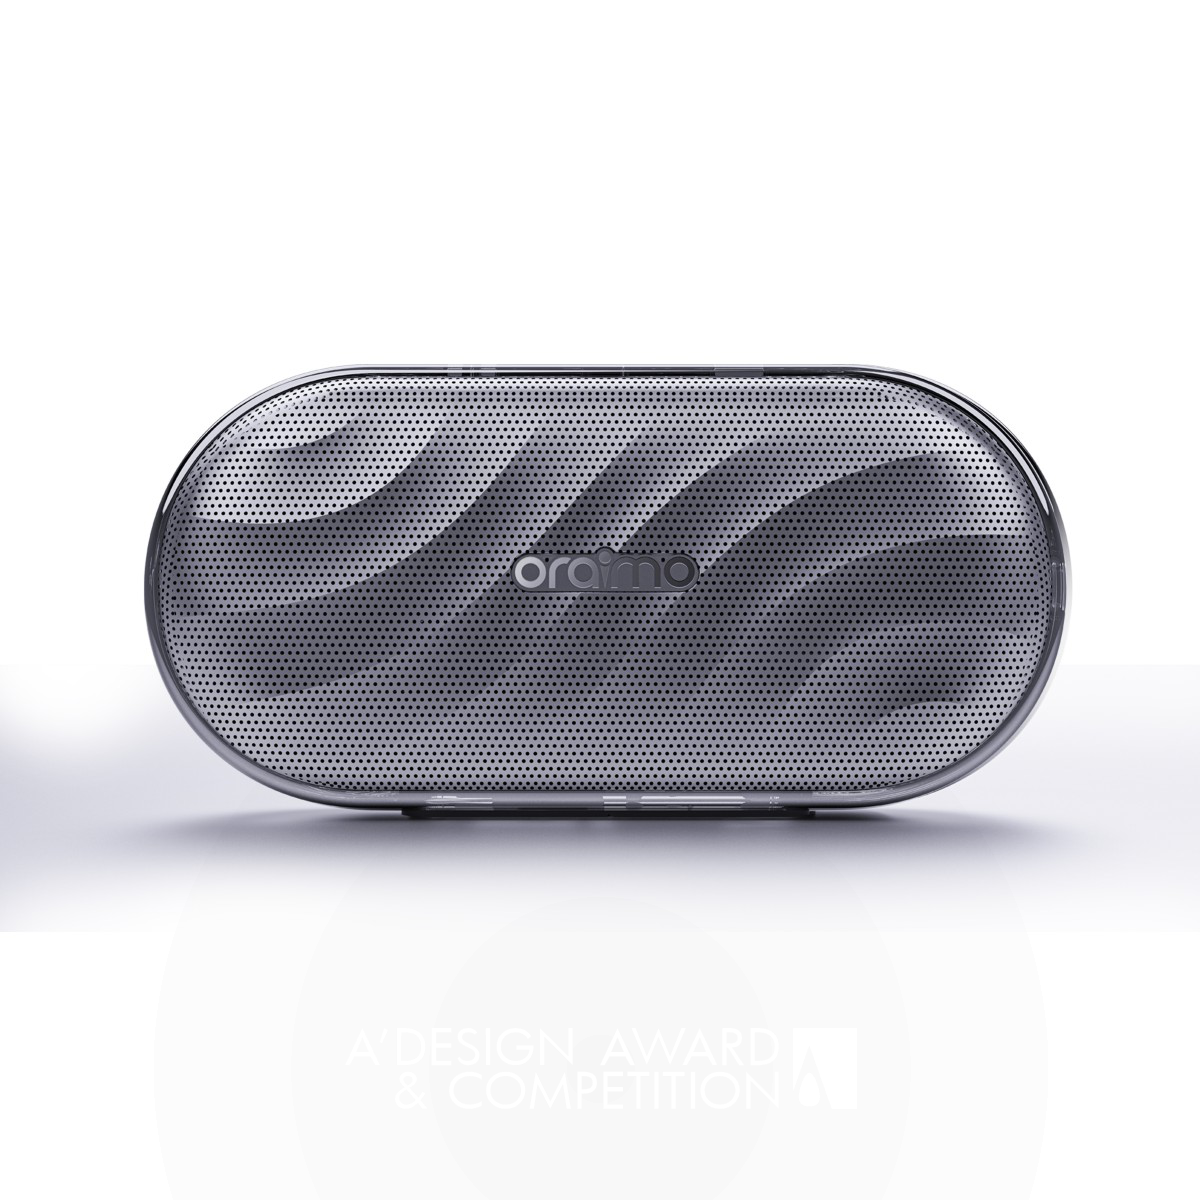 Oraimo Obs300 Speaker by Shenzhen Transsion Holdings Co   Limited